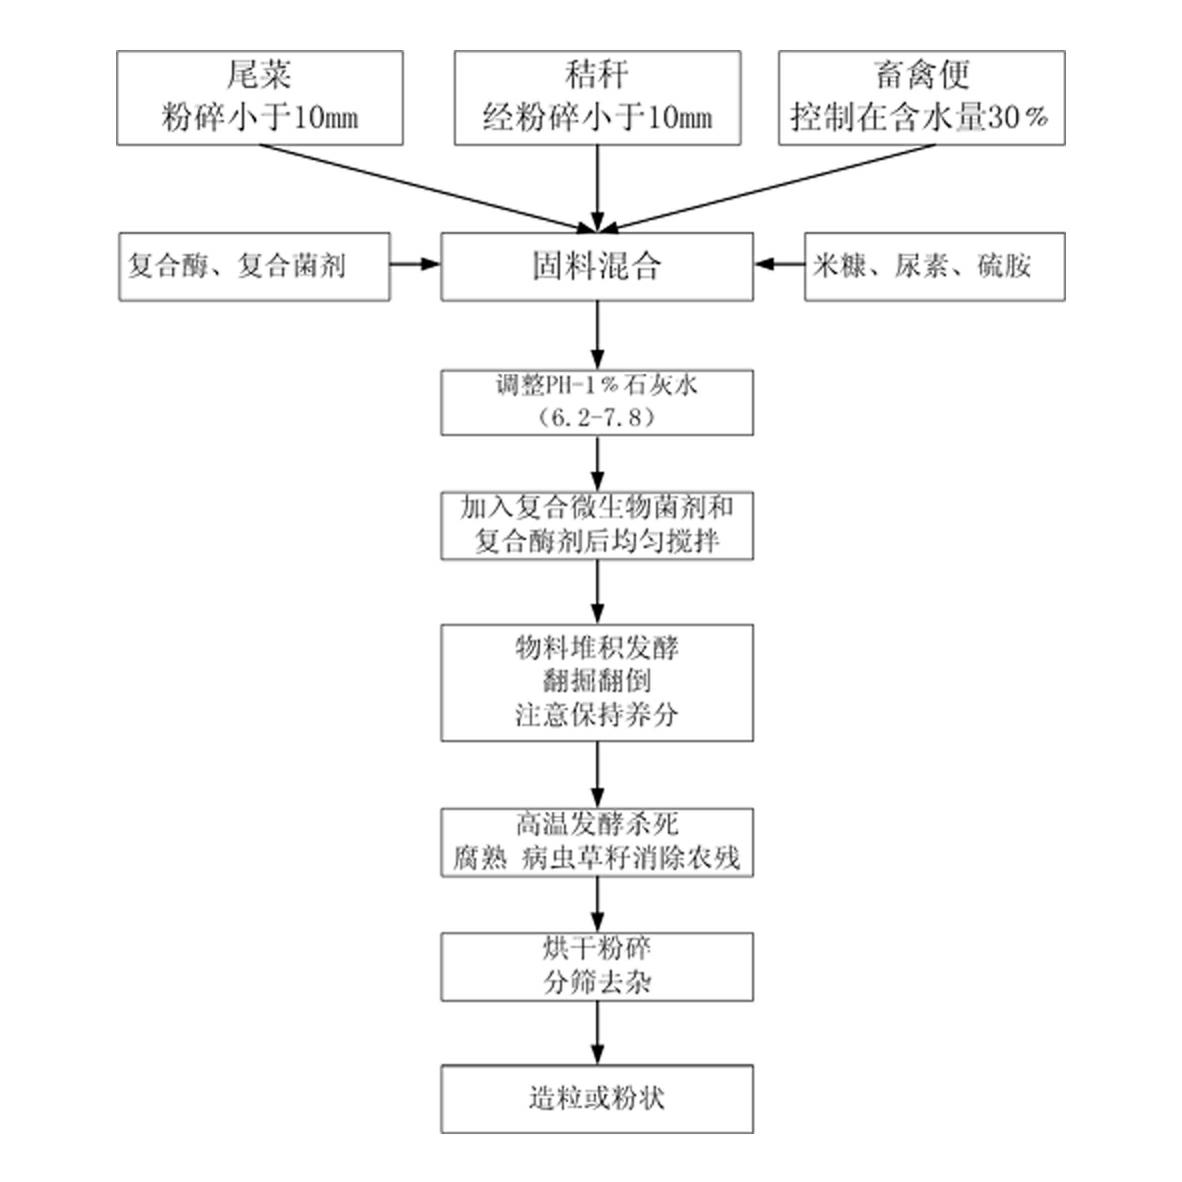 Fermented biofertilizer prepared from waste vegetables, straw and livestock and poultry feces and preparation method thereof